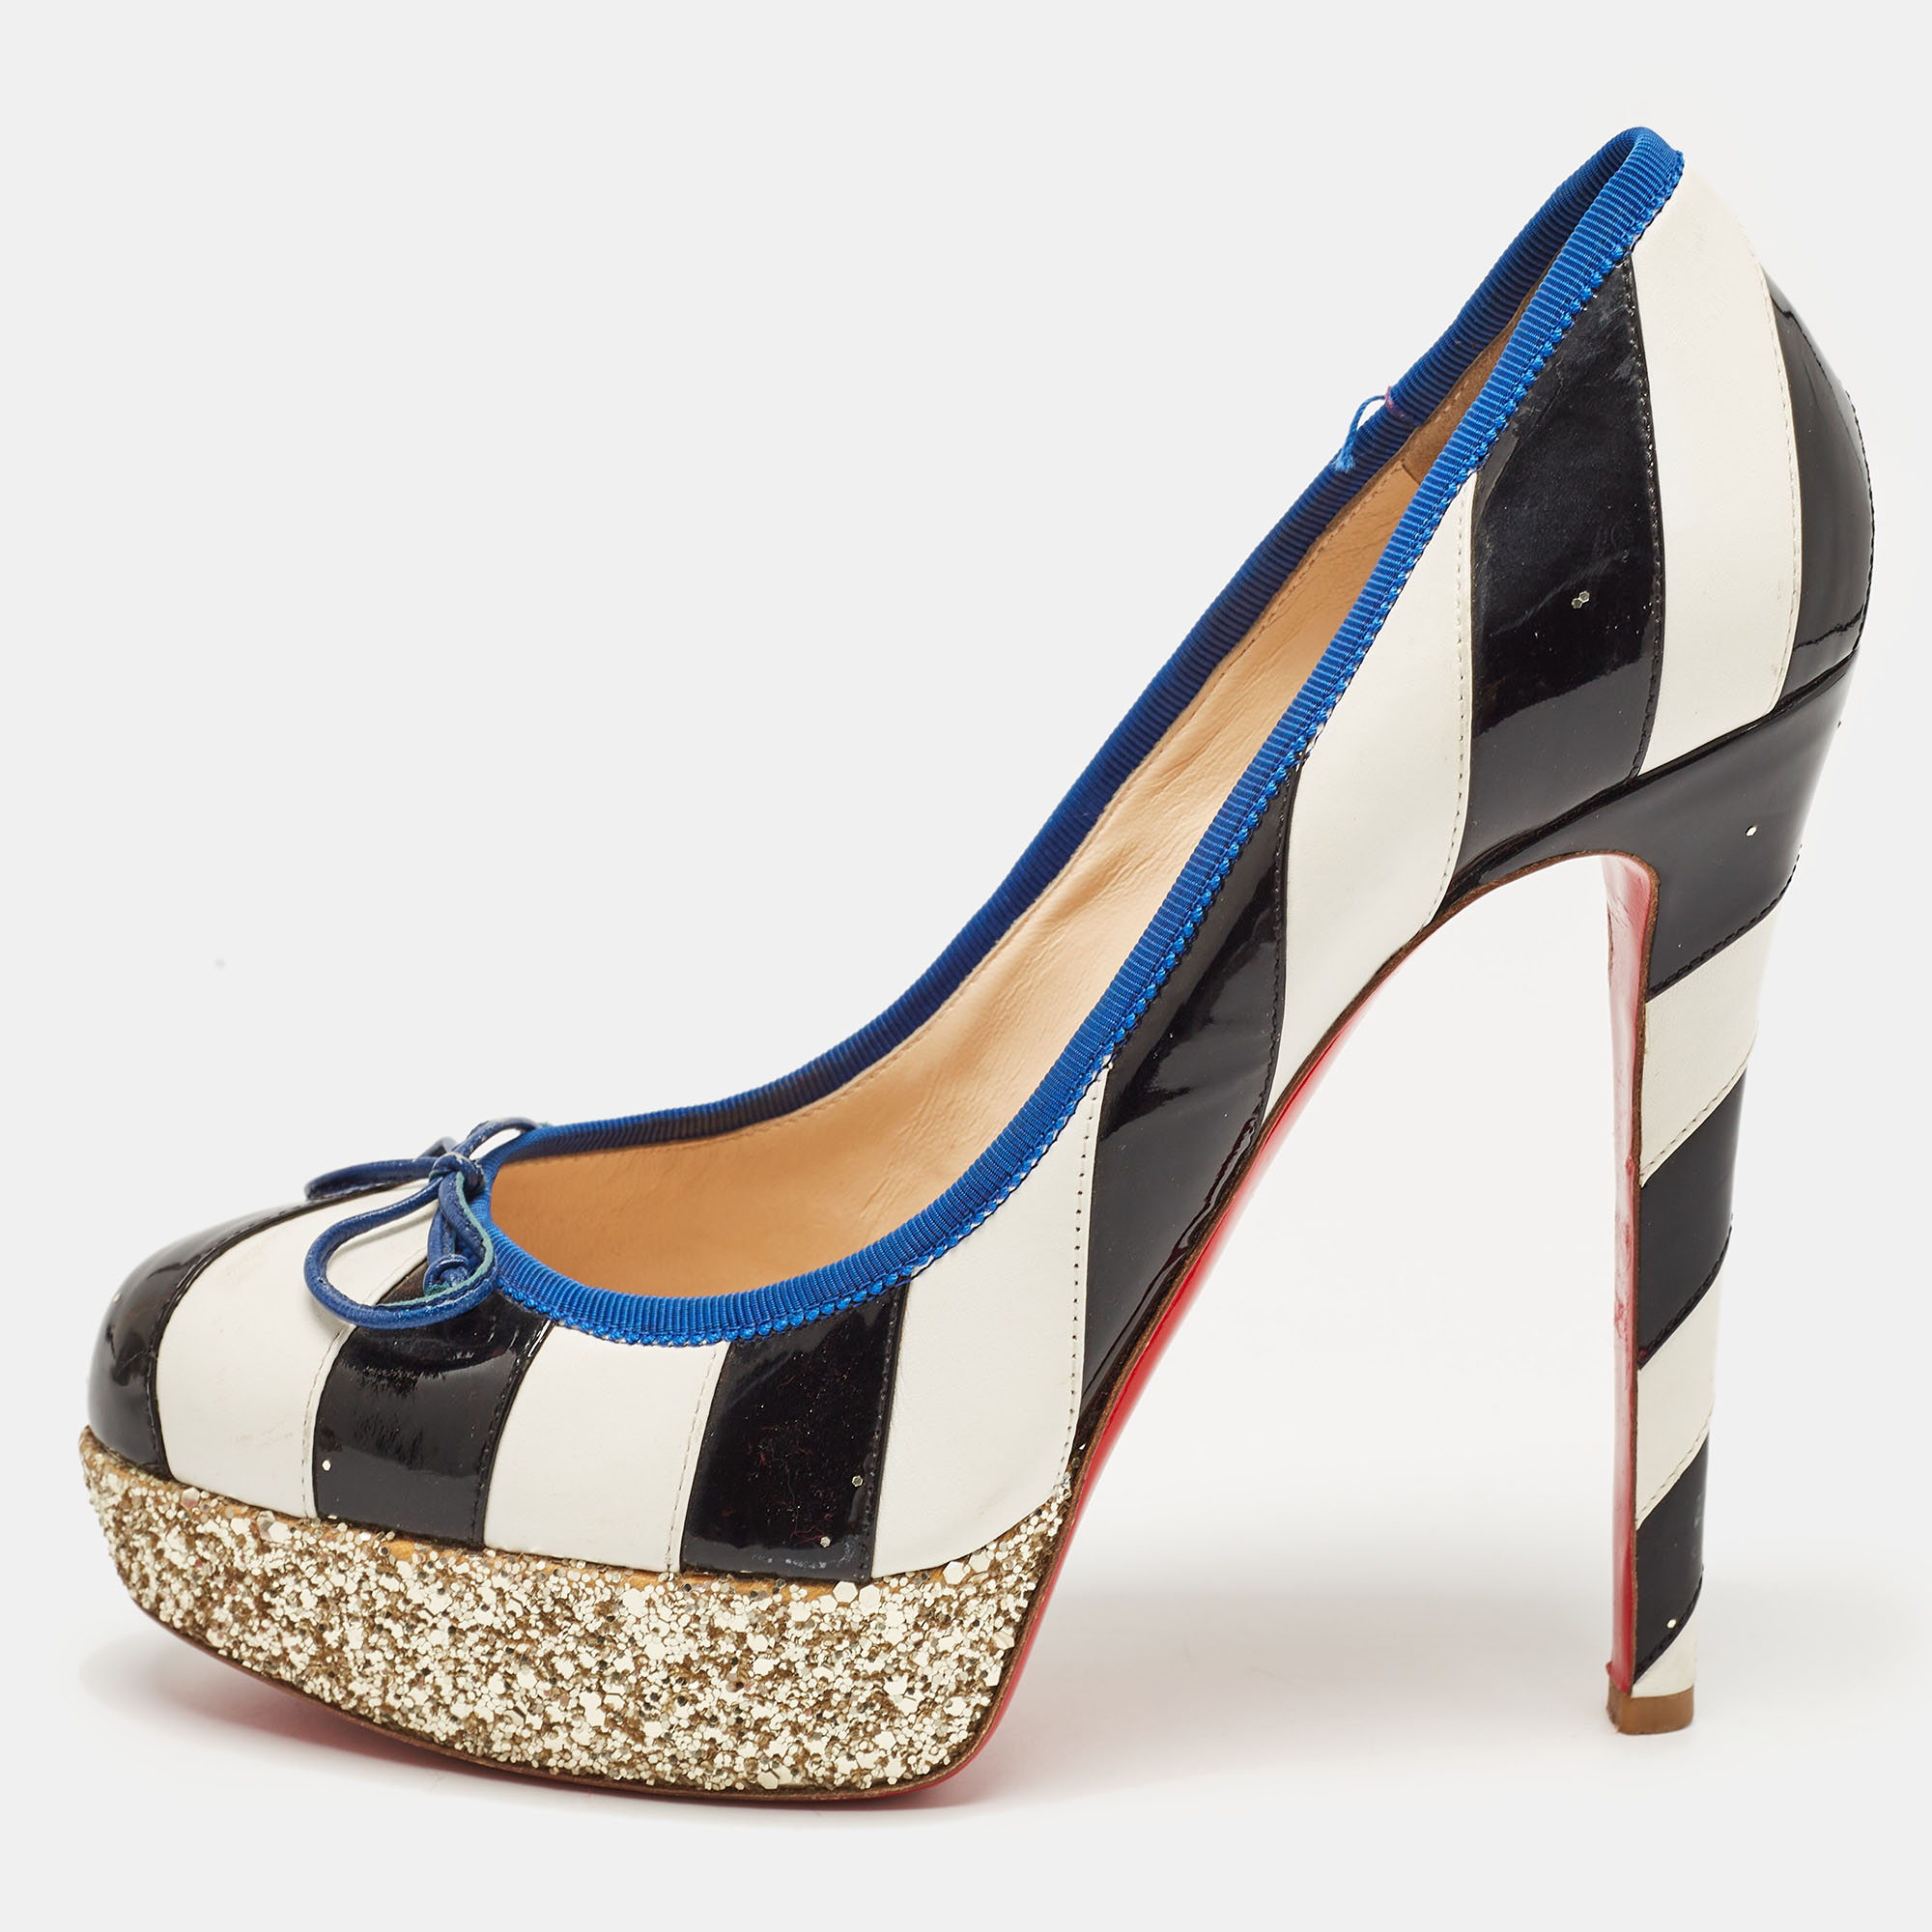 Christian louboutin white/black striped leather and patent foraine pumps size 39